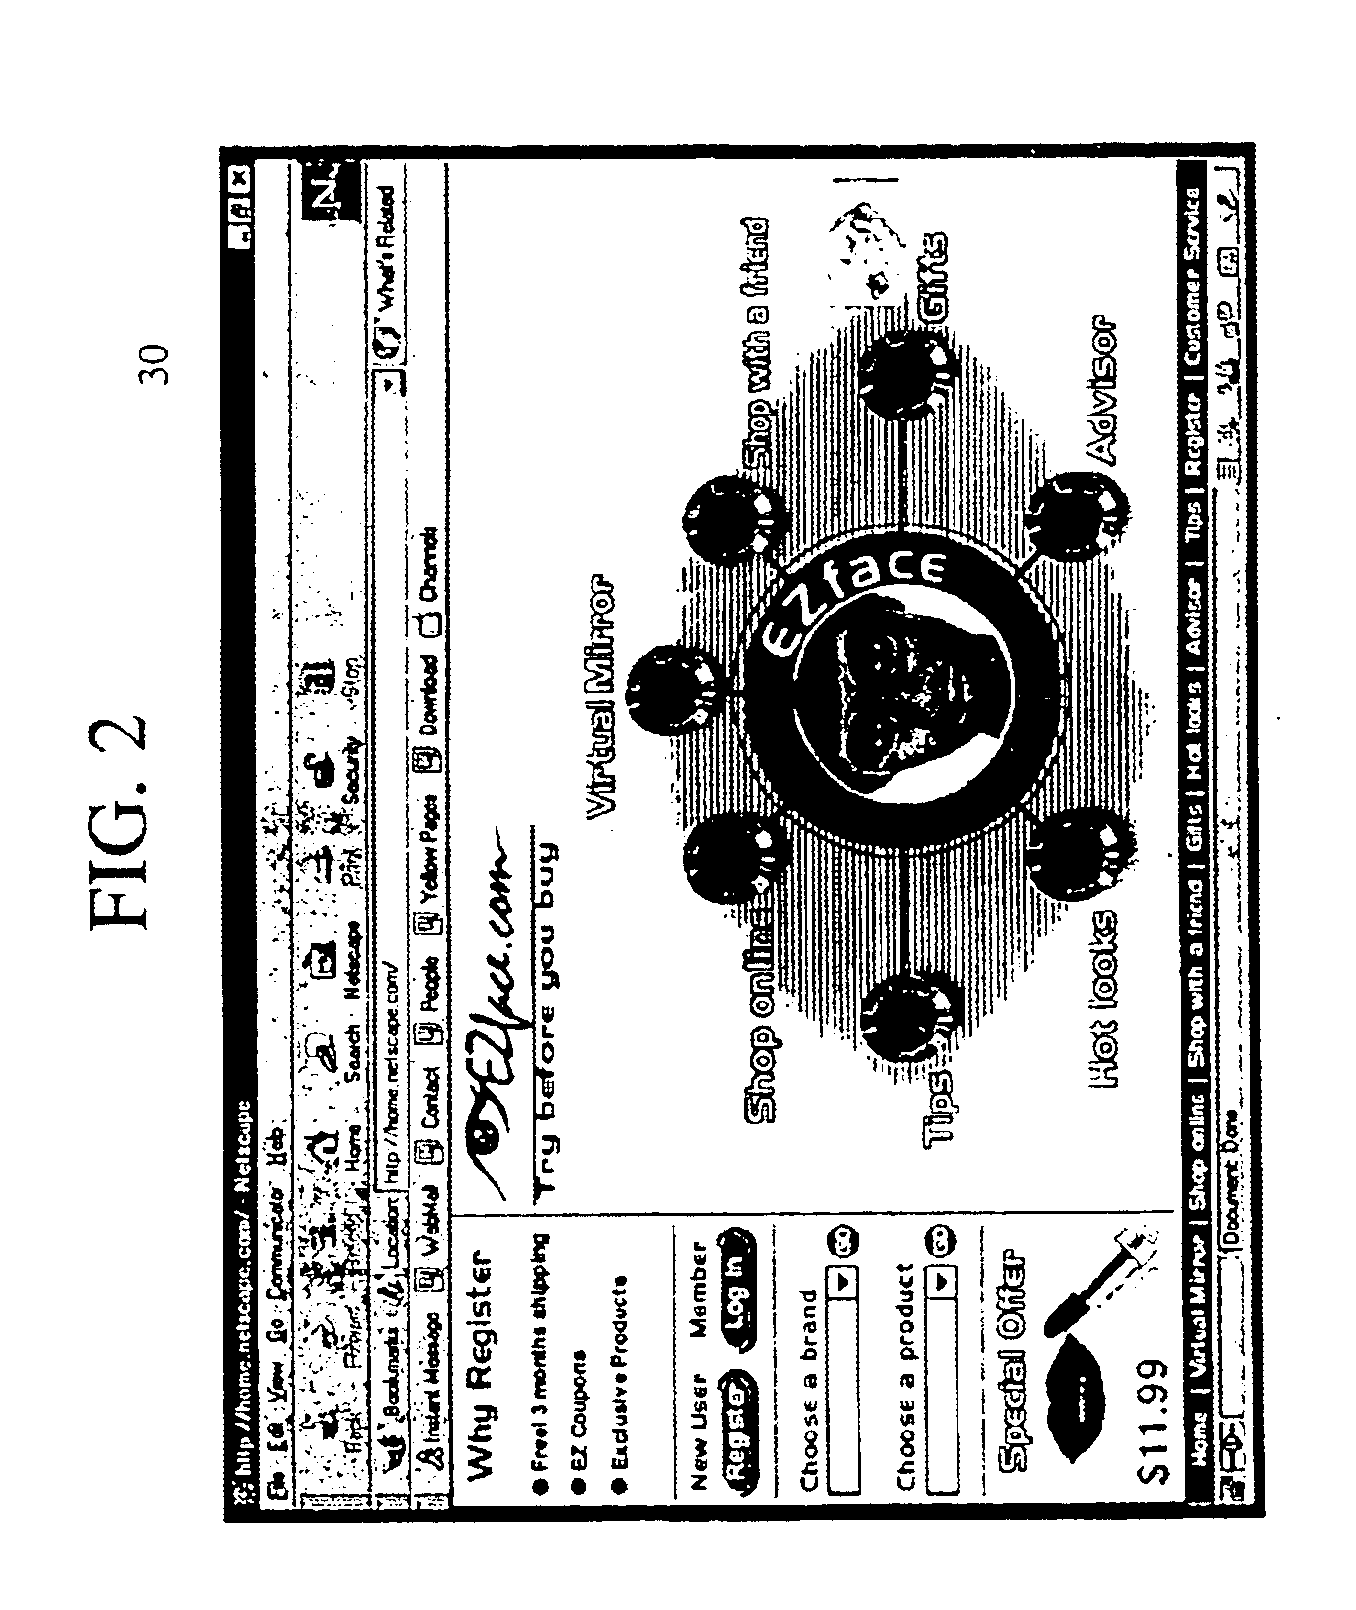 Make-up and fashion accessory display and marketing system and method